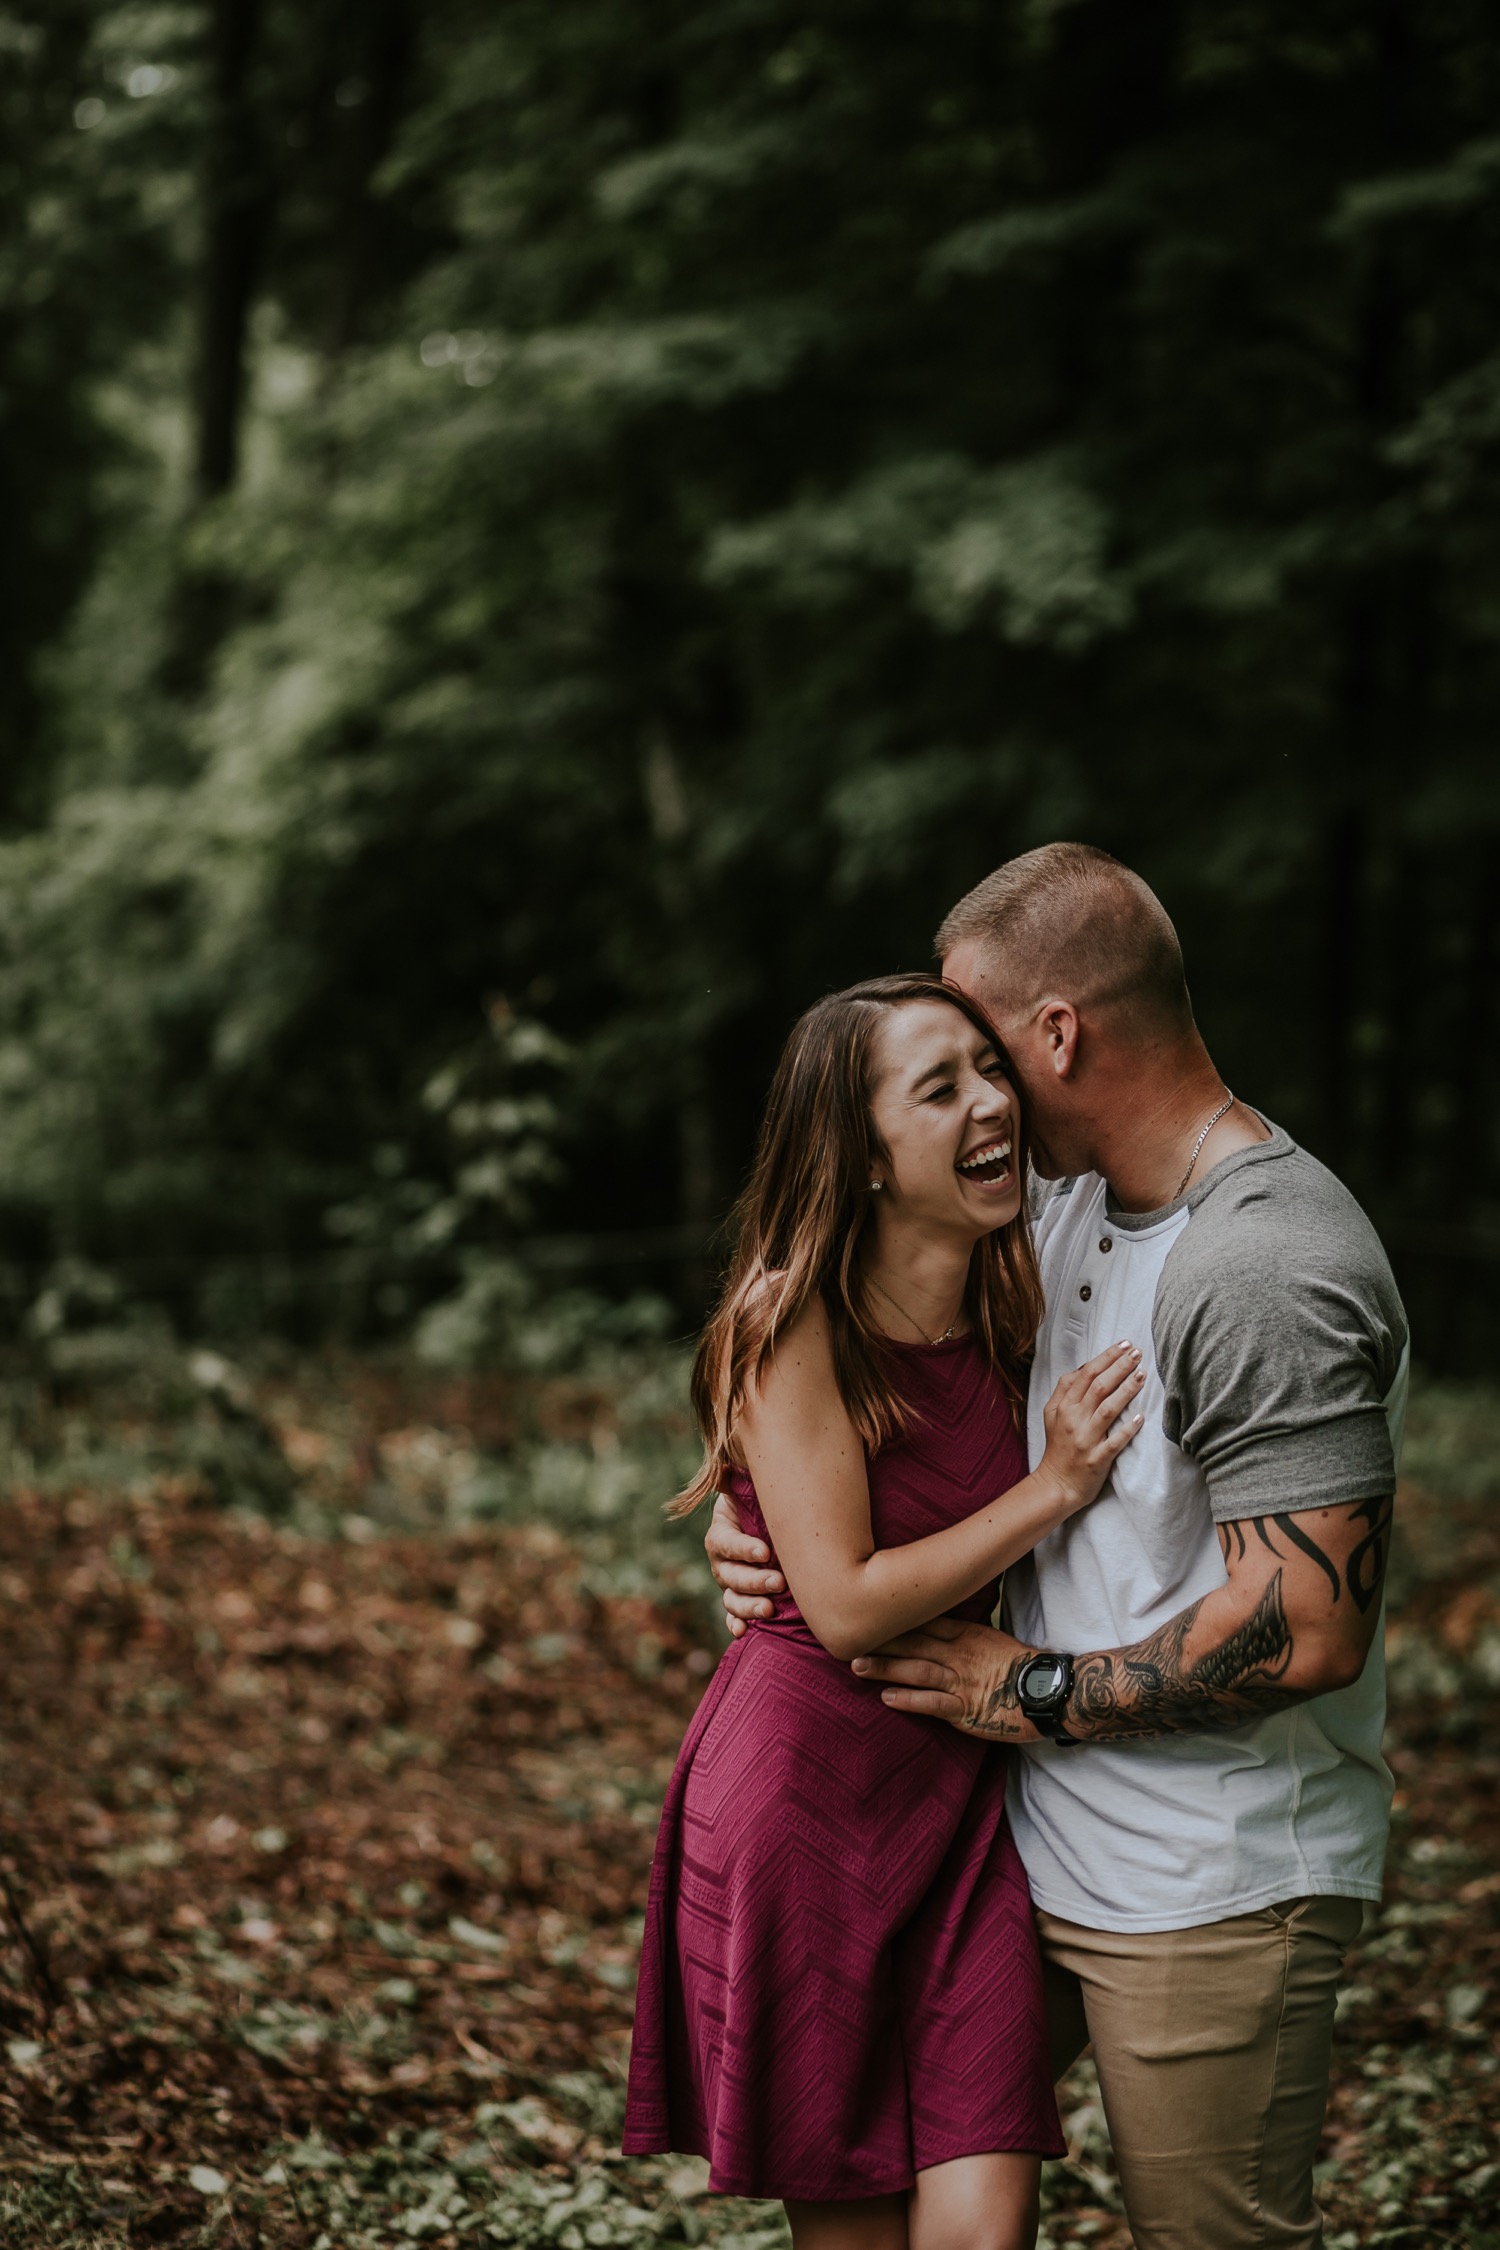 What are some good poses for couple photography? - Quora